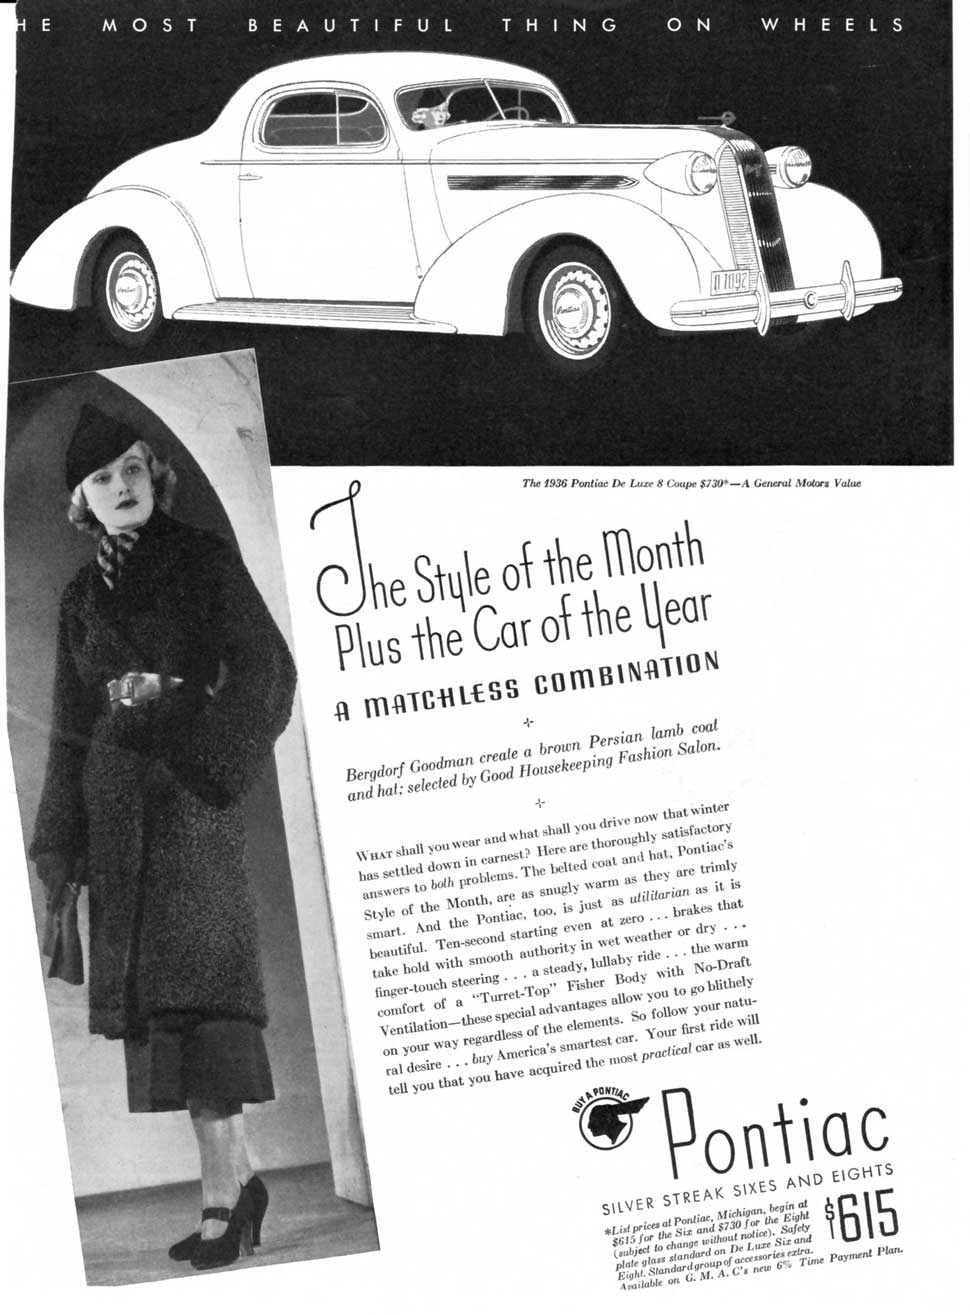 1936 Style of the Month plus the Car of the Year